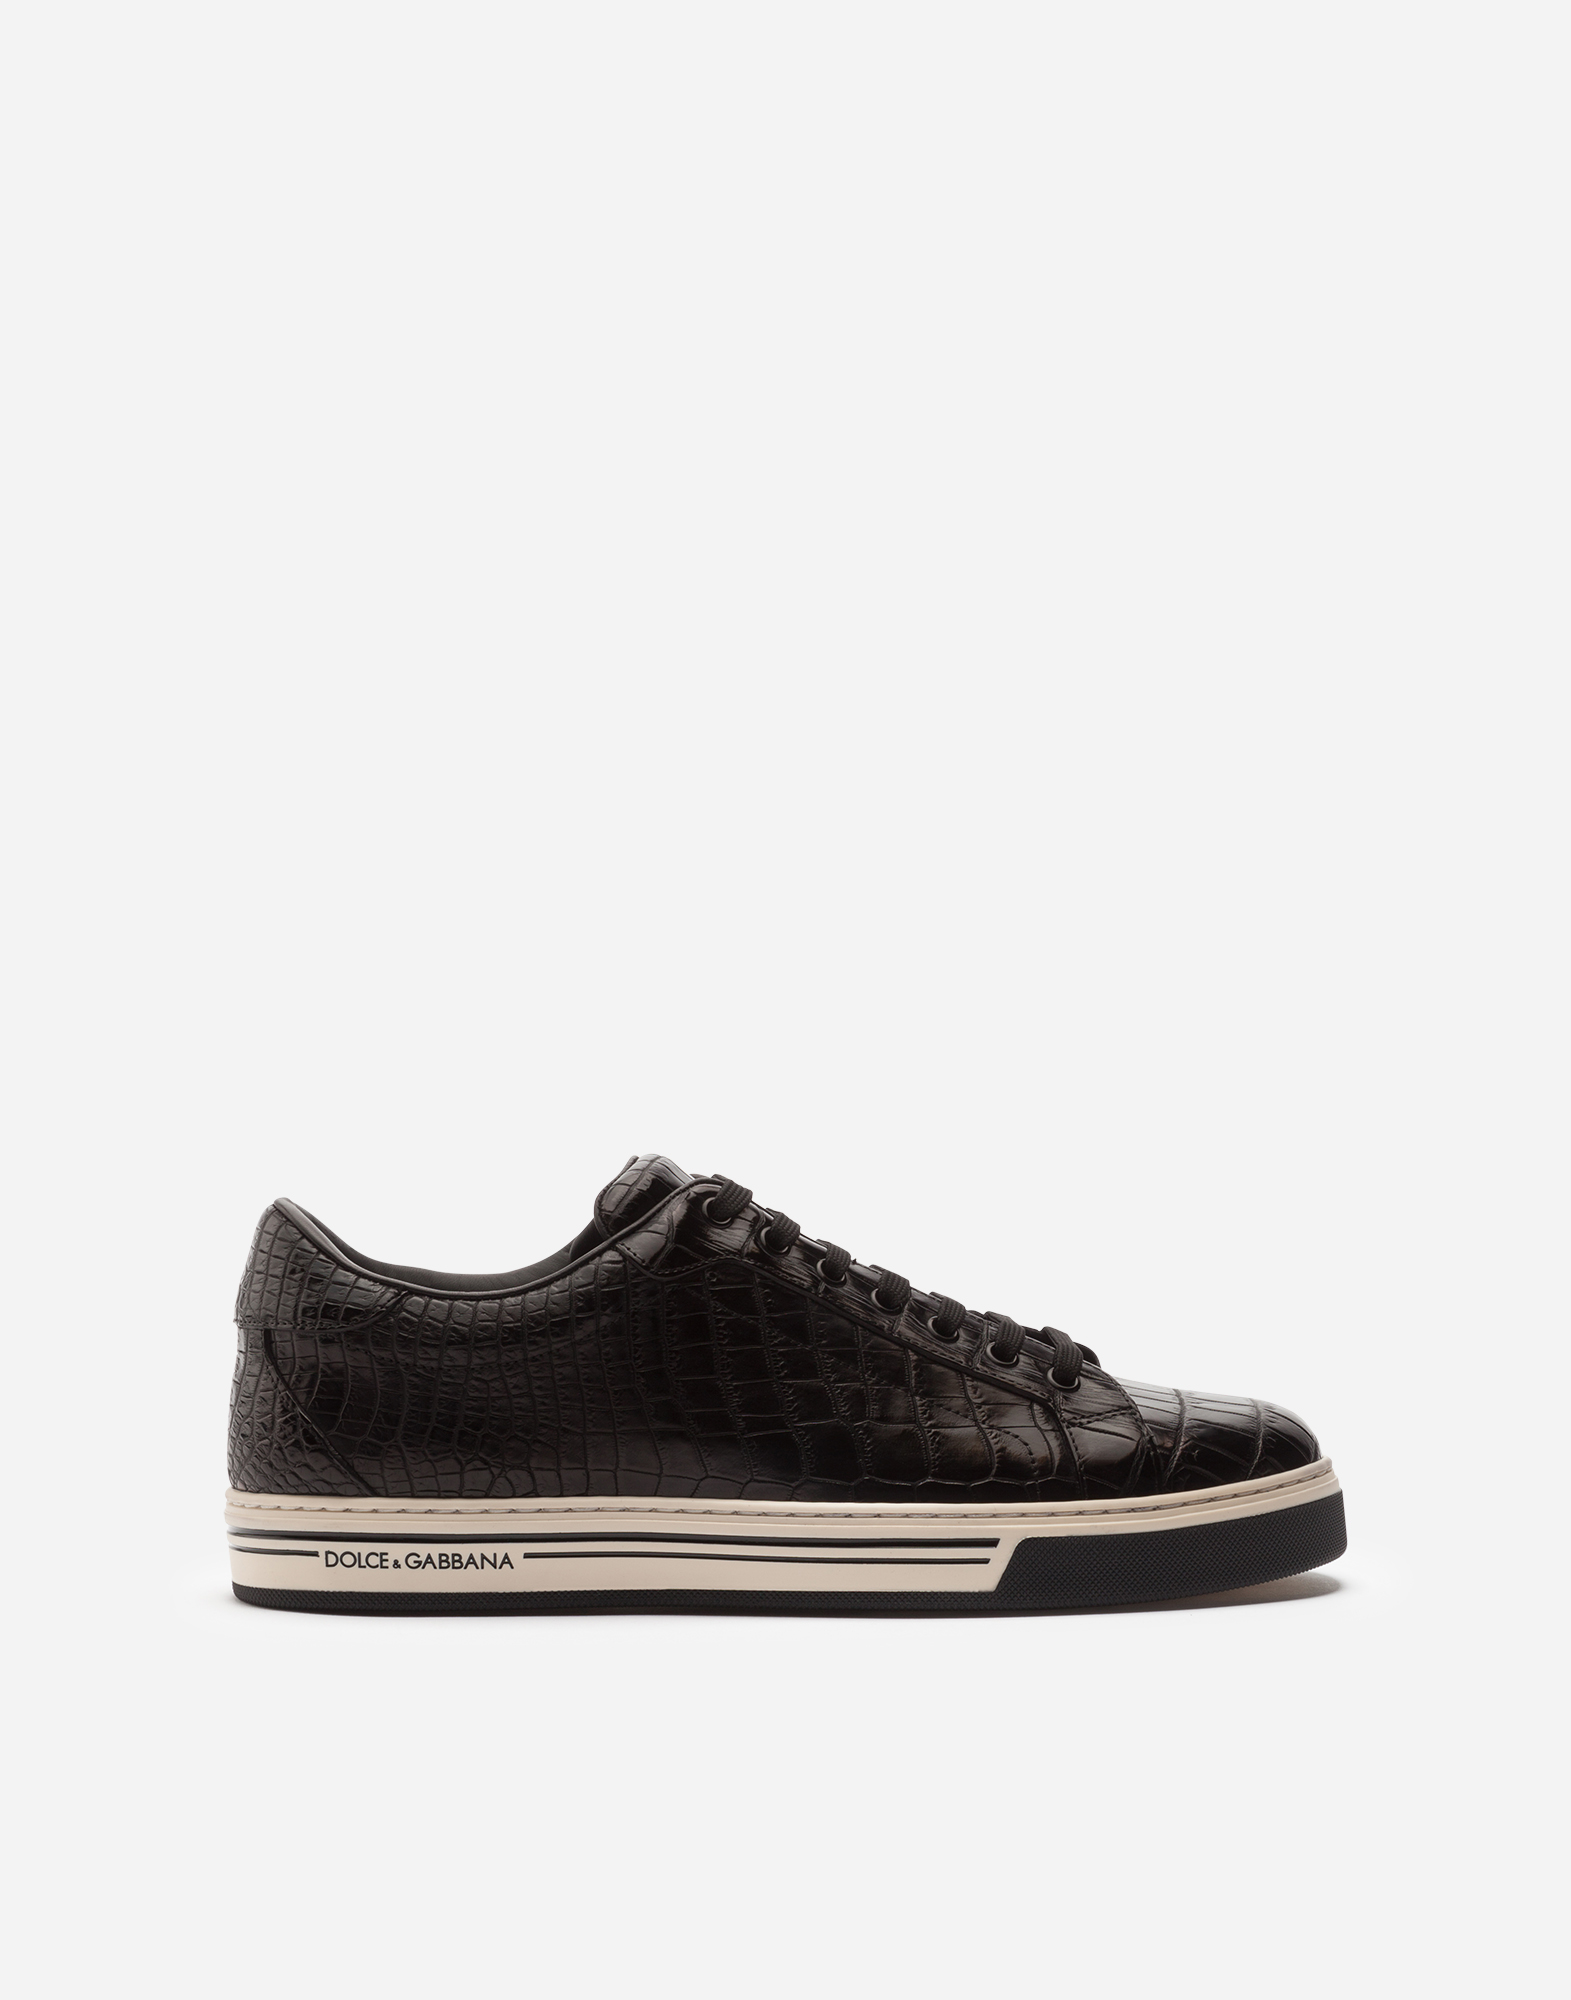 ROME SNEAKERS IN CROCODILE LEATHER